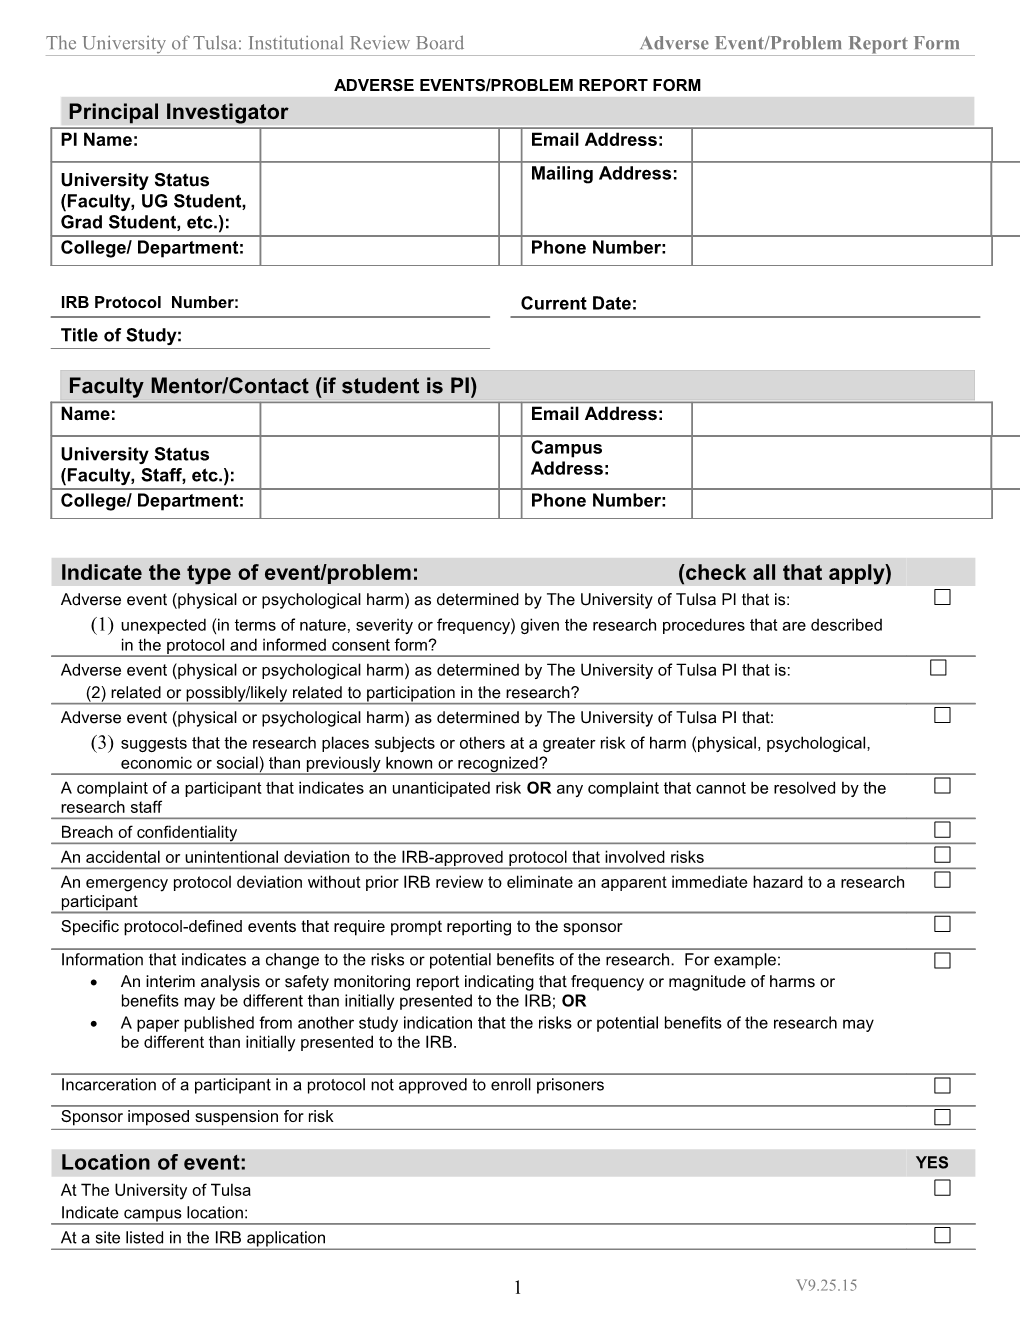 The University of Tulsa: Institutional Review Board Adverse Event/Problem Report Form